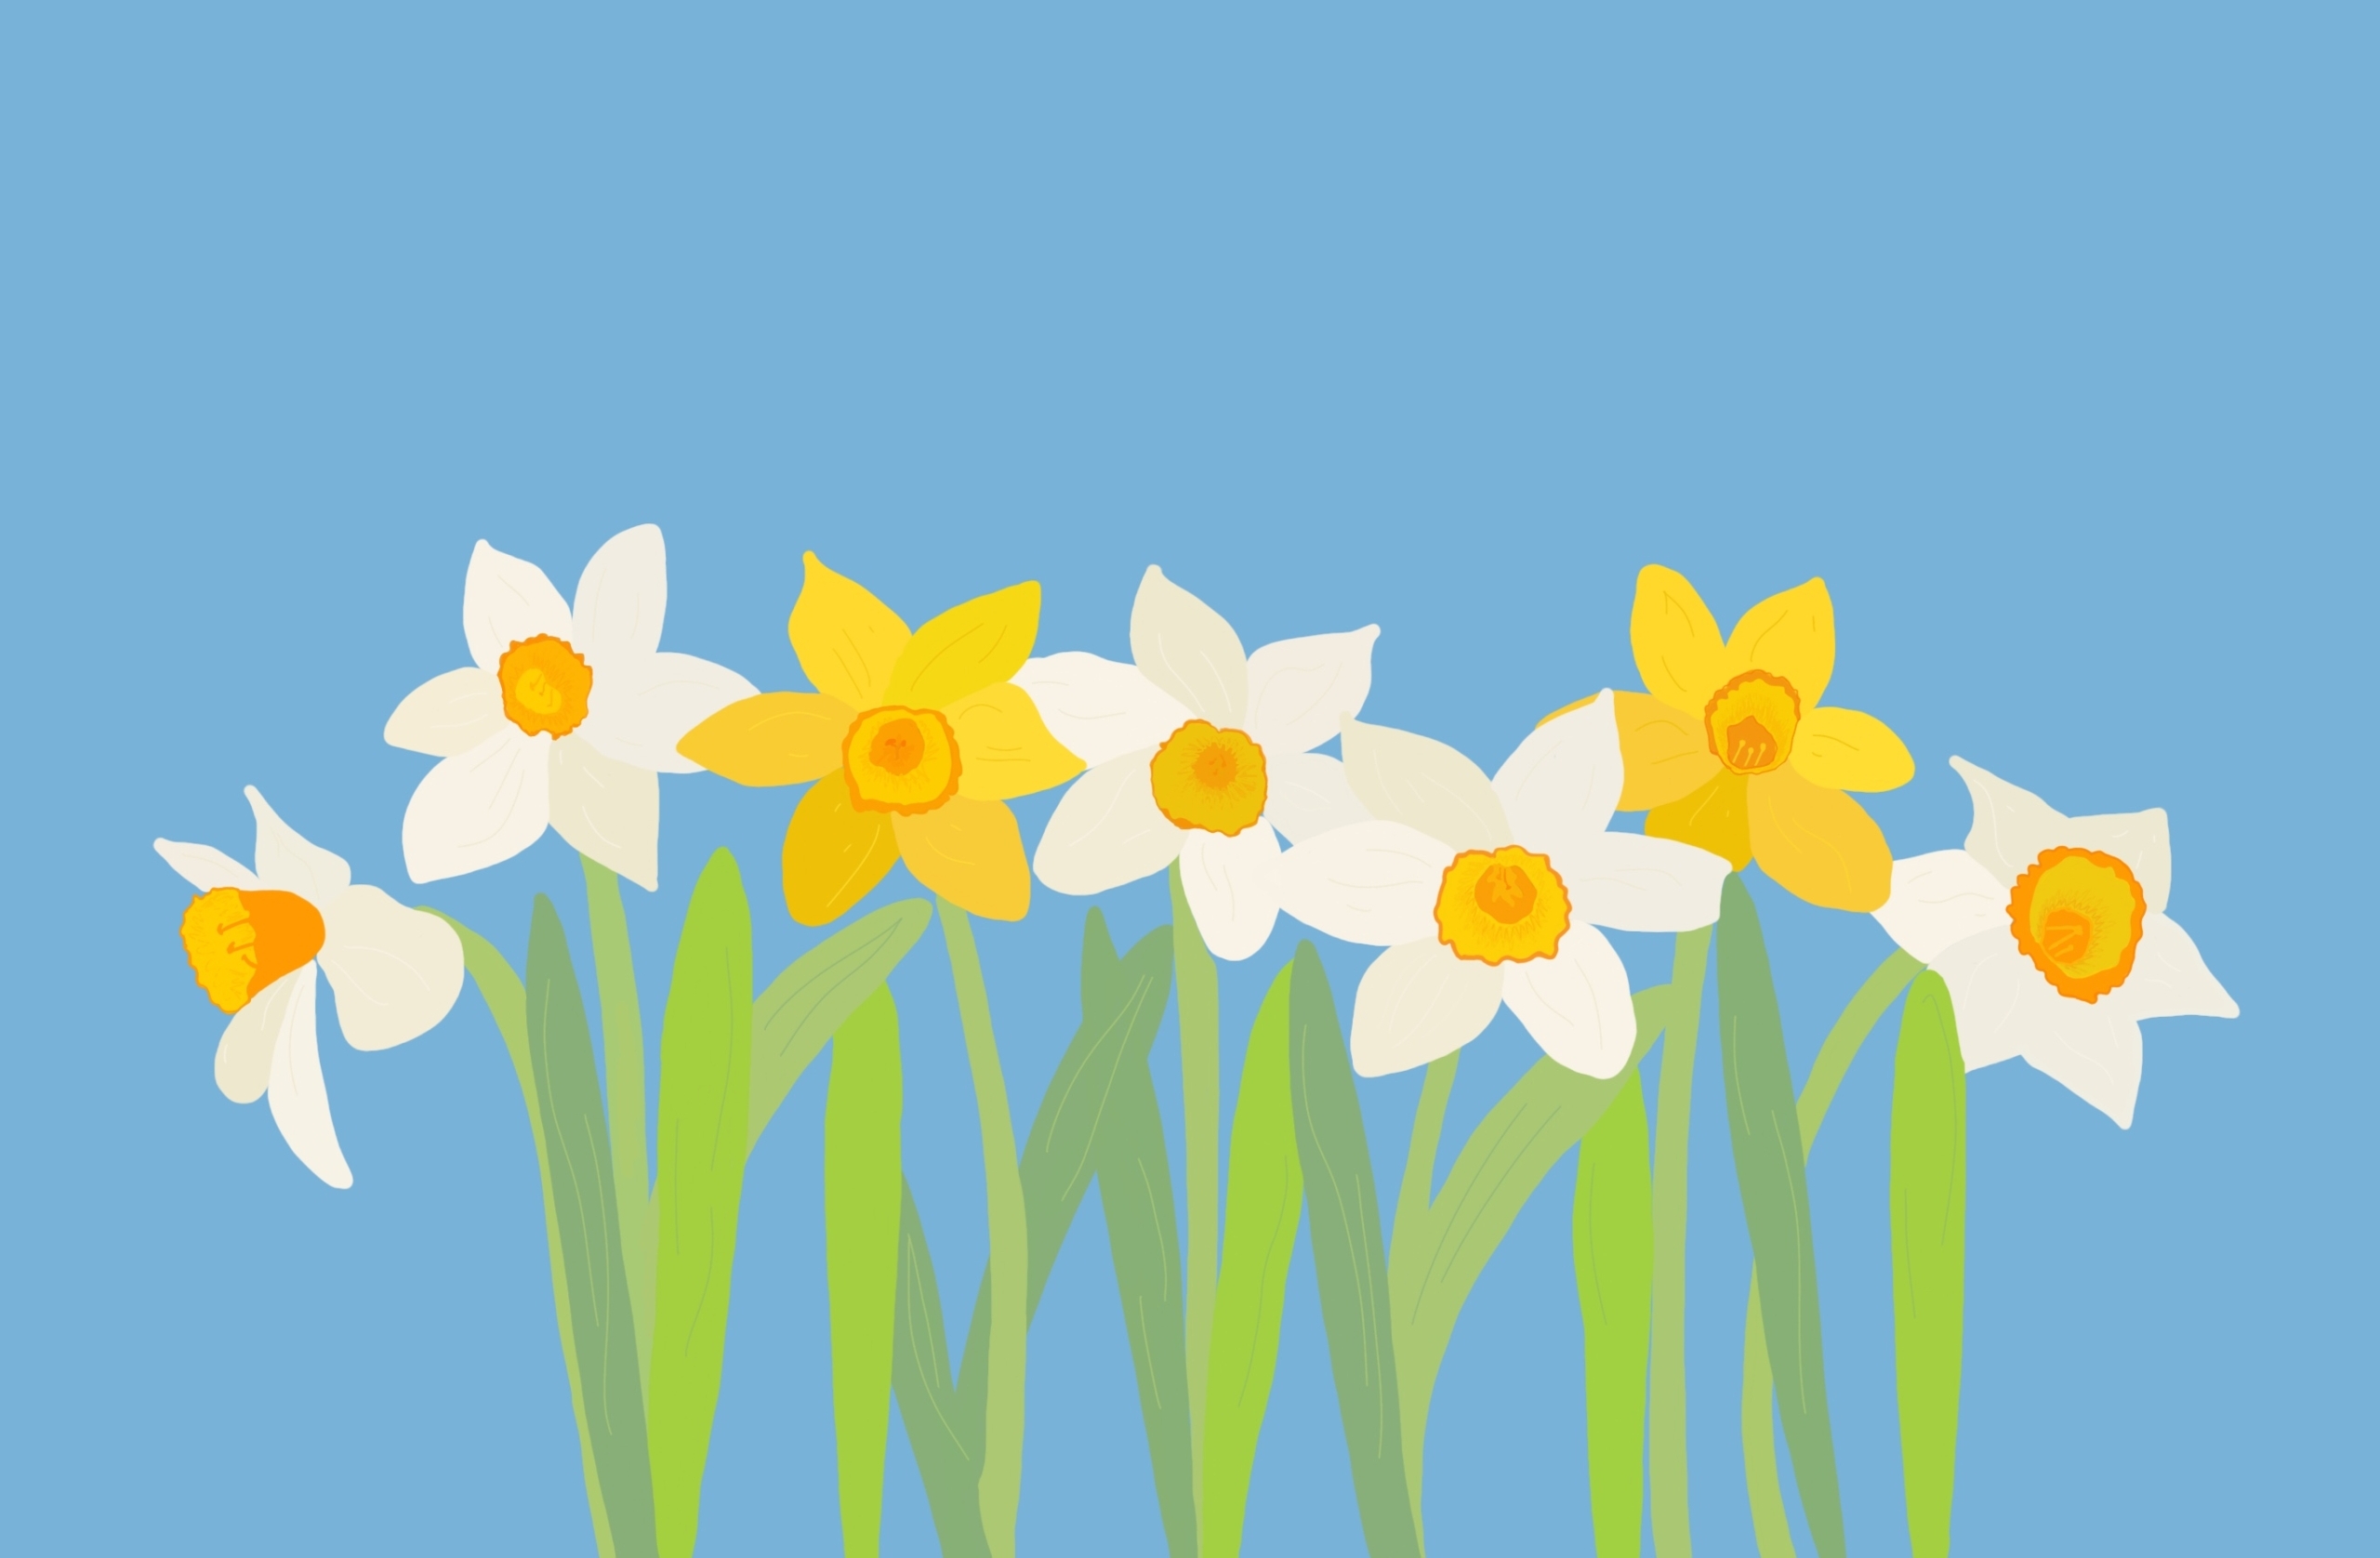 Springlike picture with daffodils on a sky blue background